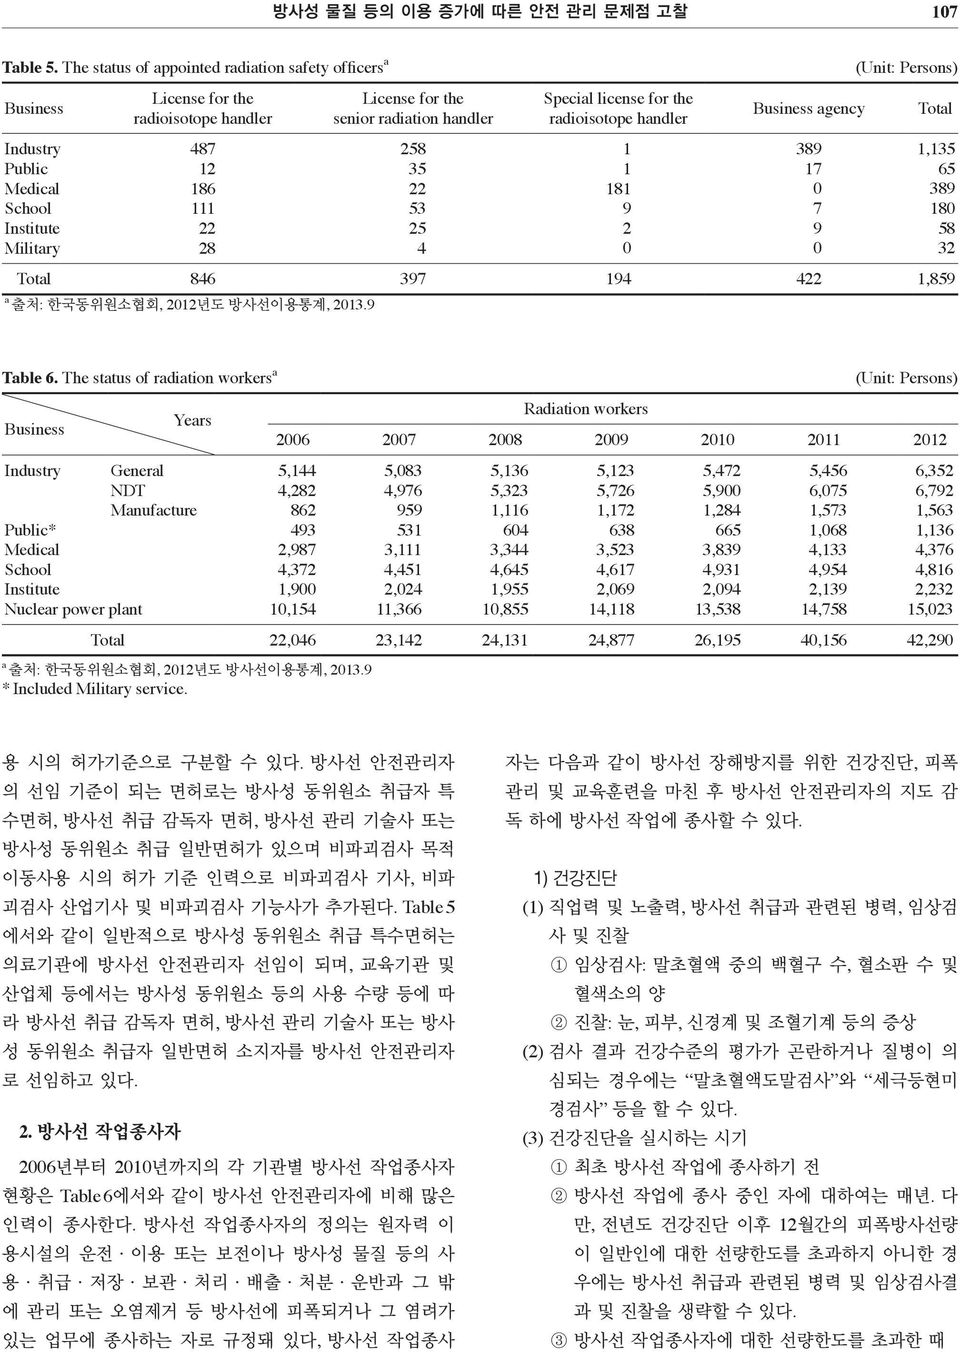 35 22 53 25 4 Specil license for the rdioisotope hndler Business gency (Unit: Persons) Totl 846 397 194 422 1,859 출처: 한국동위원소협회, 2012년도 방사선이용통계, 2013.